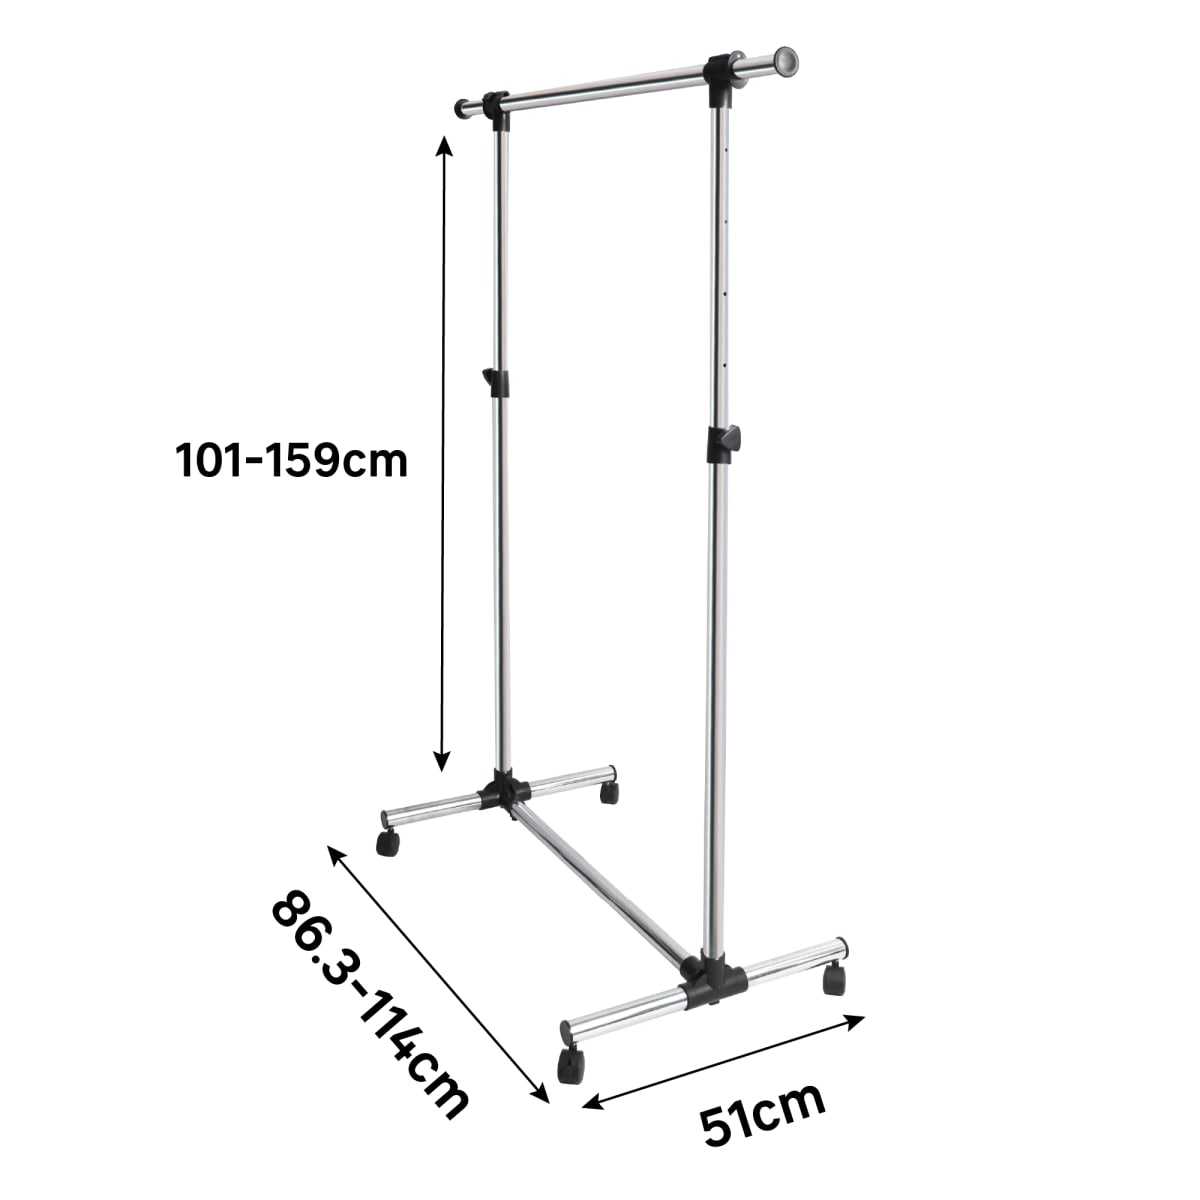 STAND WITH 1 BAR AND WHEELS W86.3xD51xH159CM CHROMIUM-METAL HEIGHT ADJUSTMENT